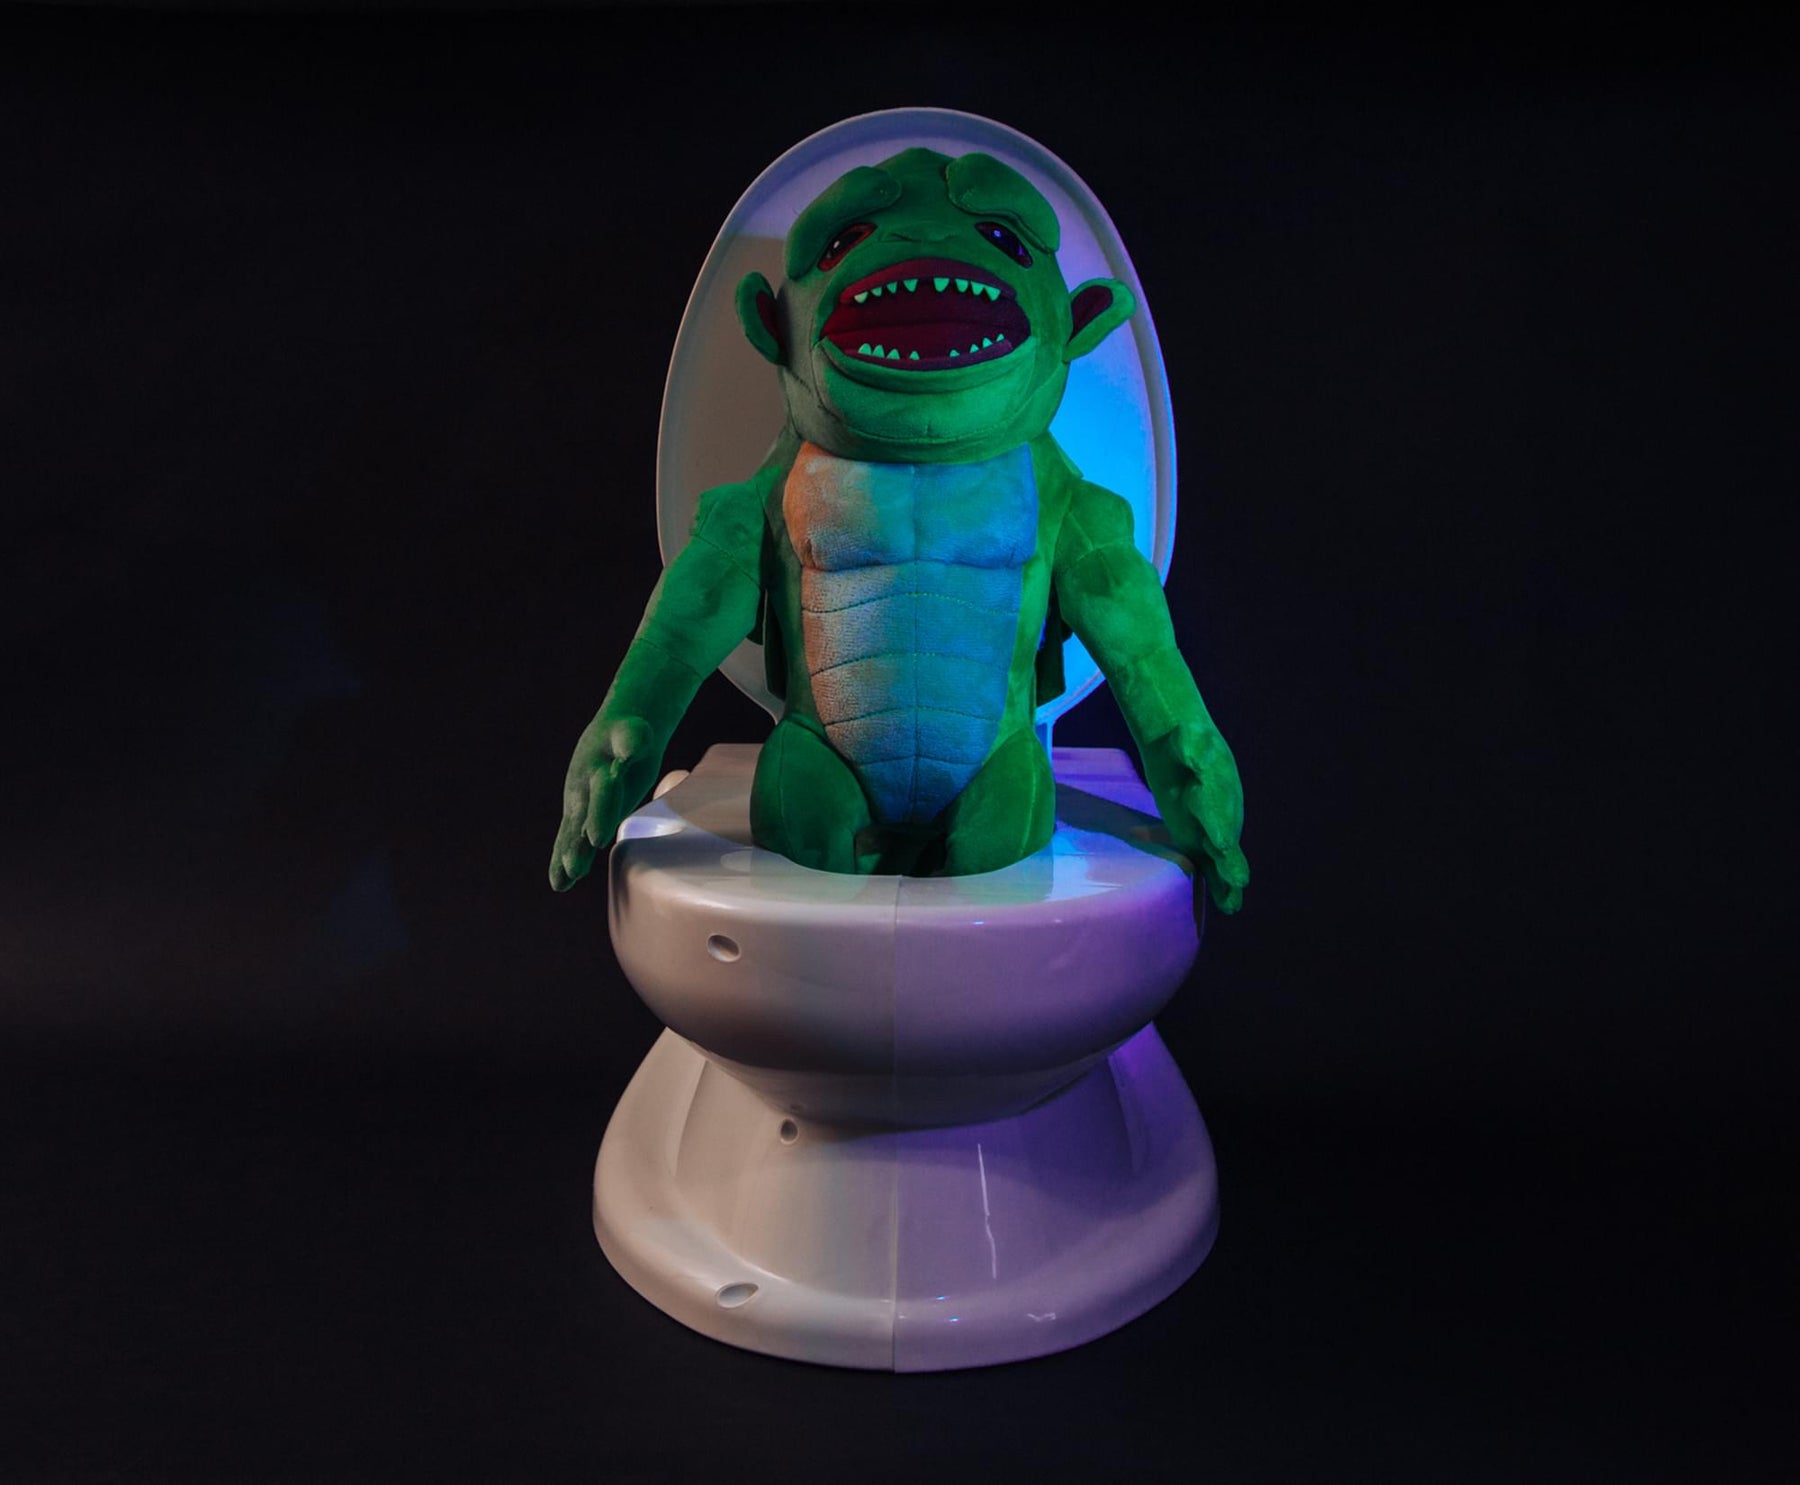 Ghoulies 14-Inch Collector Plush Toy | Fish Ghoulie